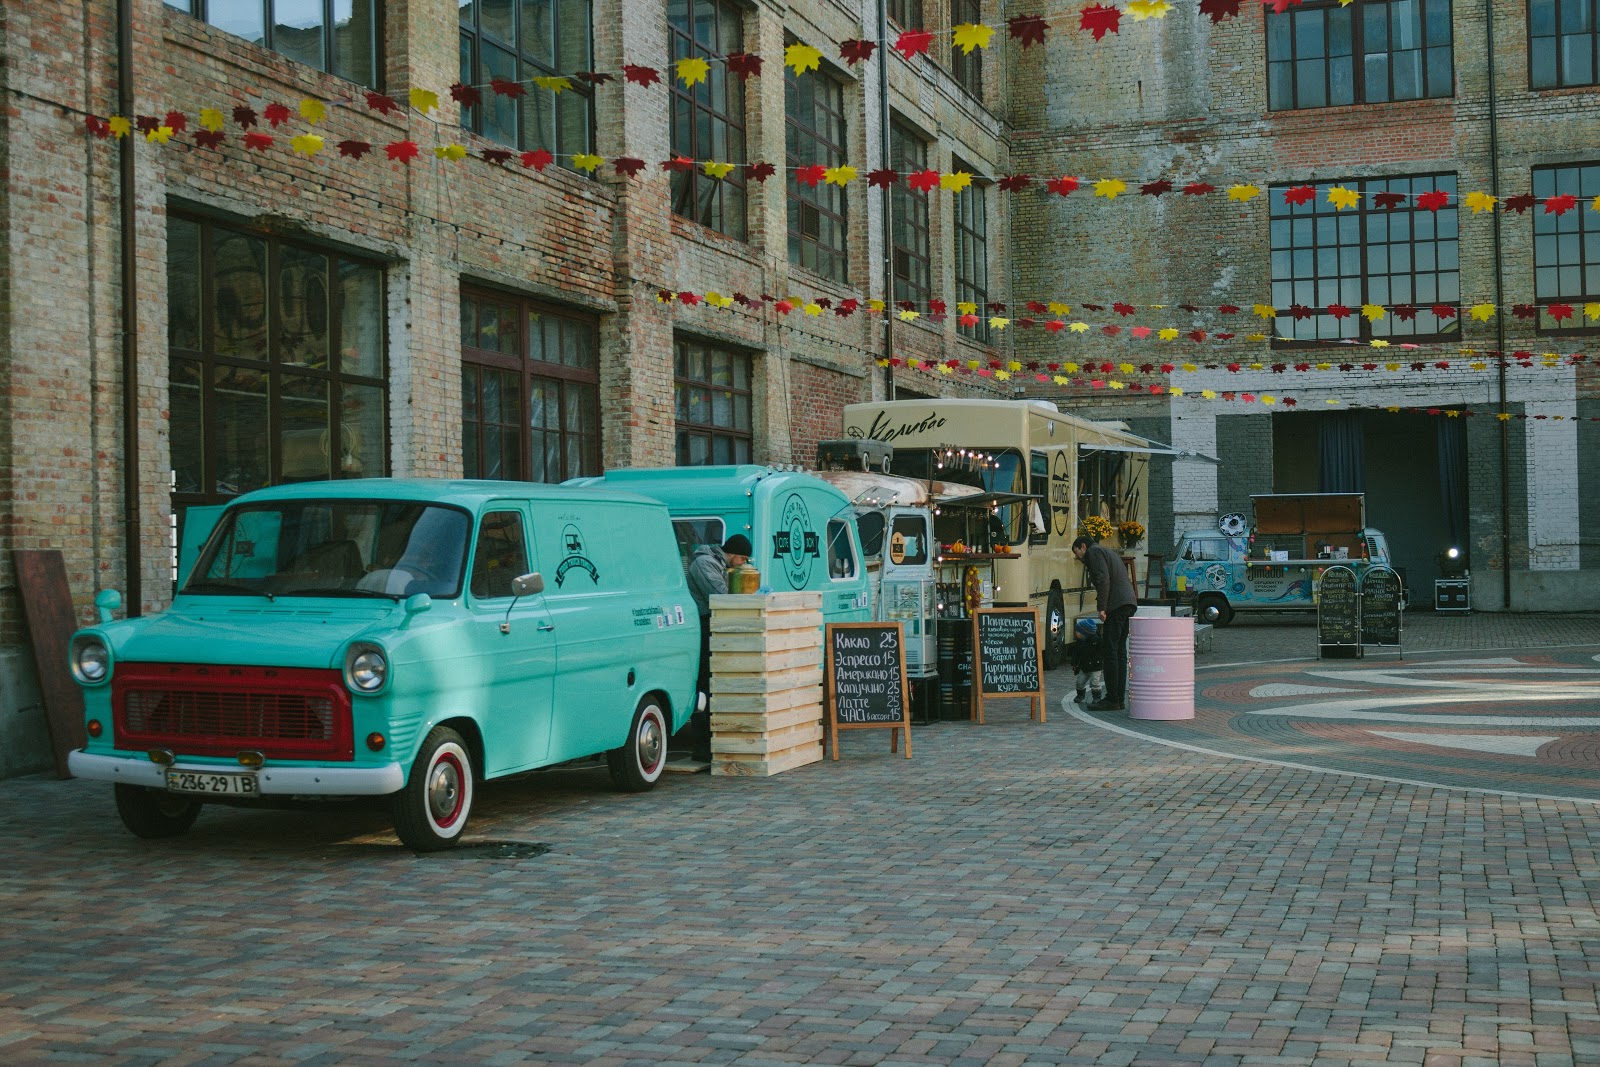 Startup business food trucks parked on a street.